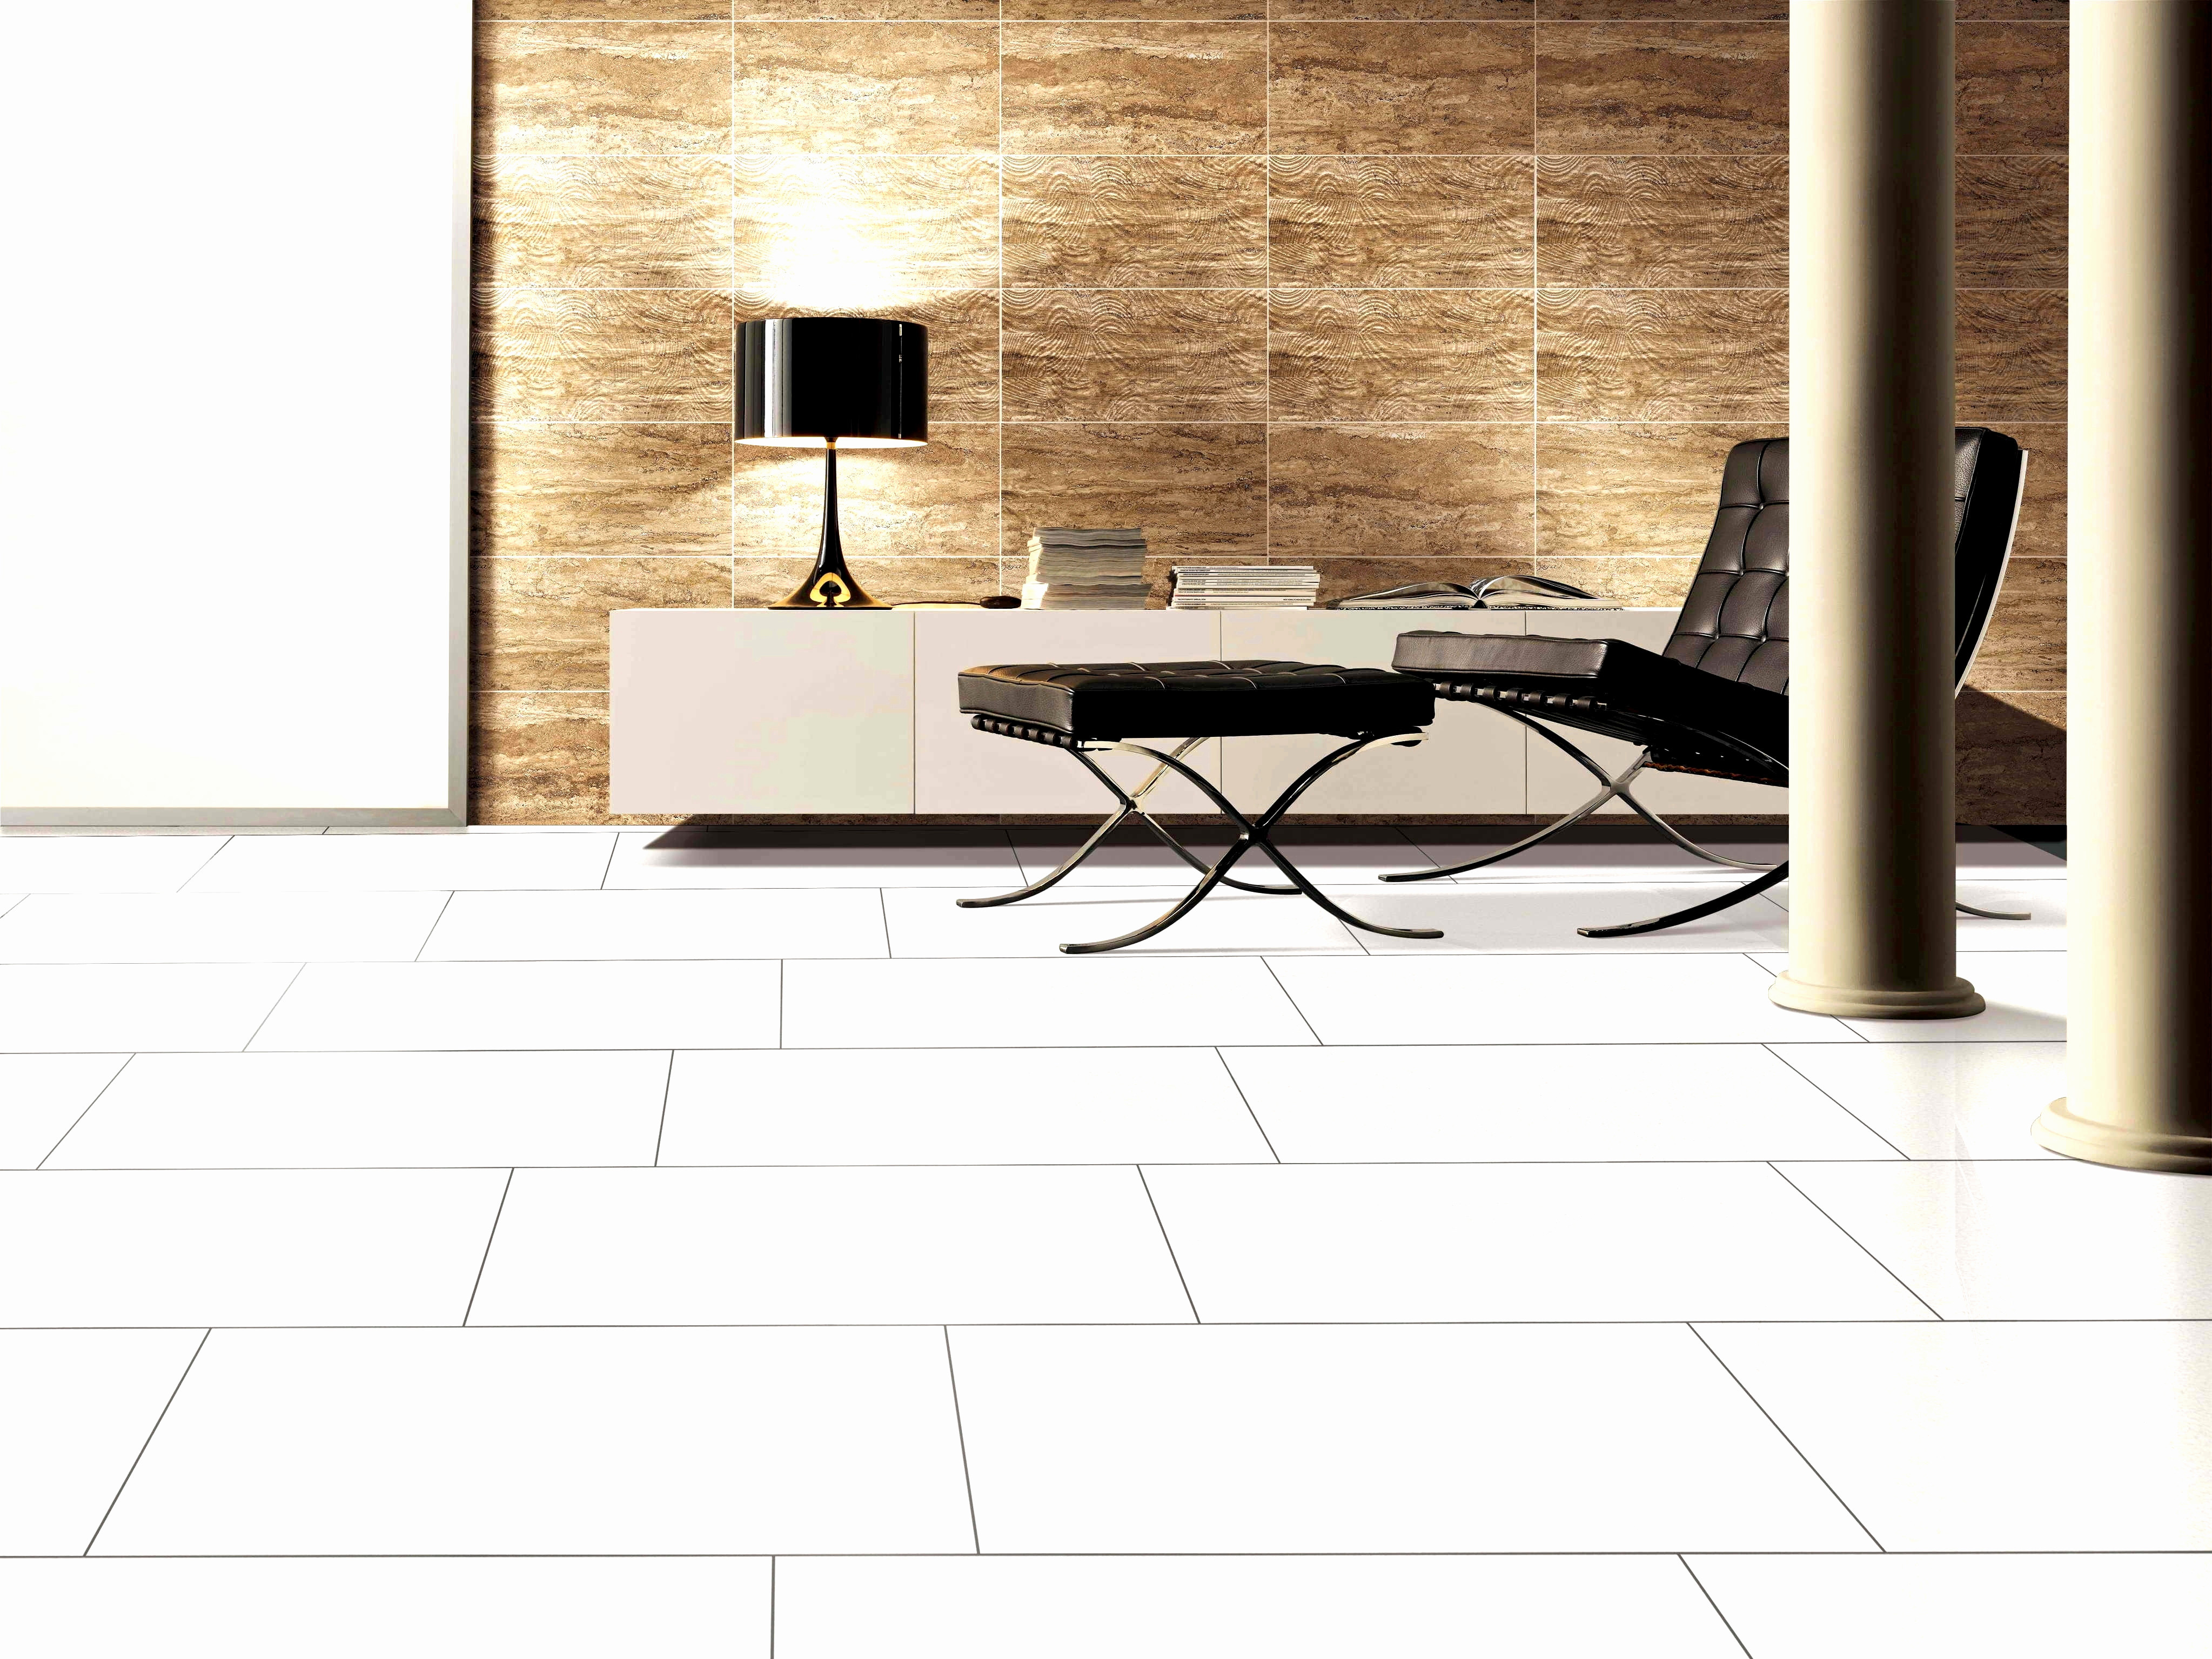 Hardwood Floor Transition Pieces Of Tile to Hardwood Transition Best Of Wood Floor to Tile Transition Inside Tile to Hardwood Transition Lovely 50 Best Floor Transition Tile to Wood 50 S